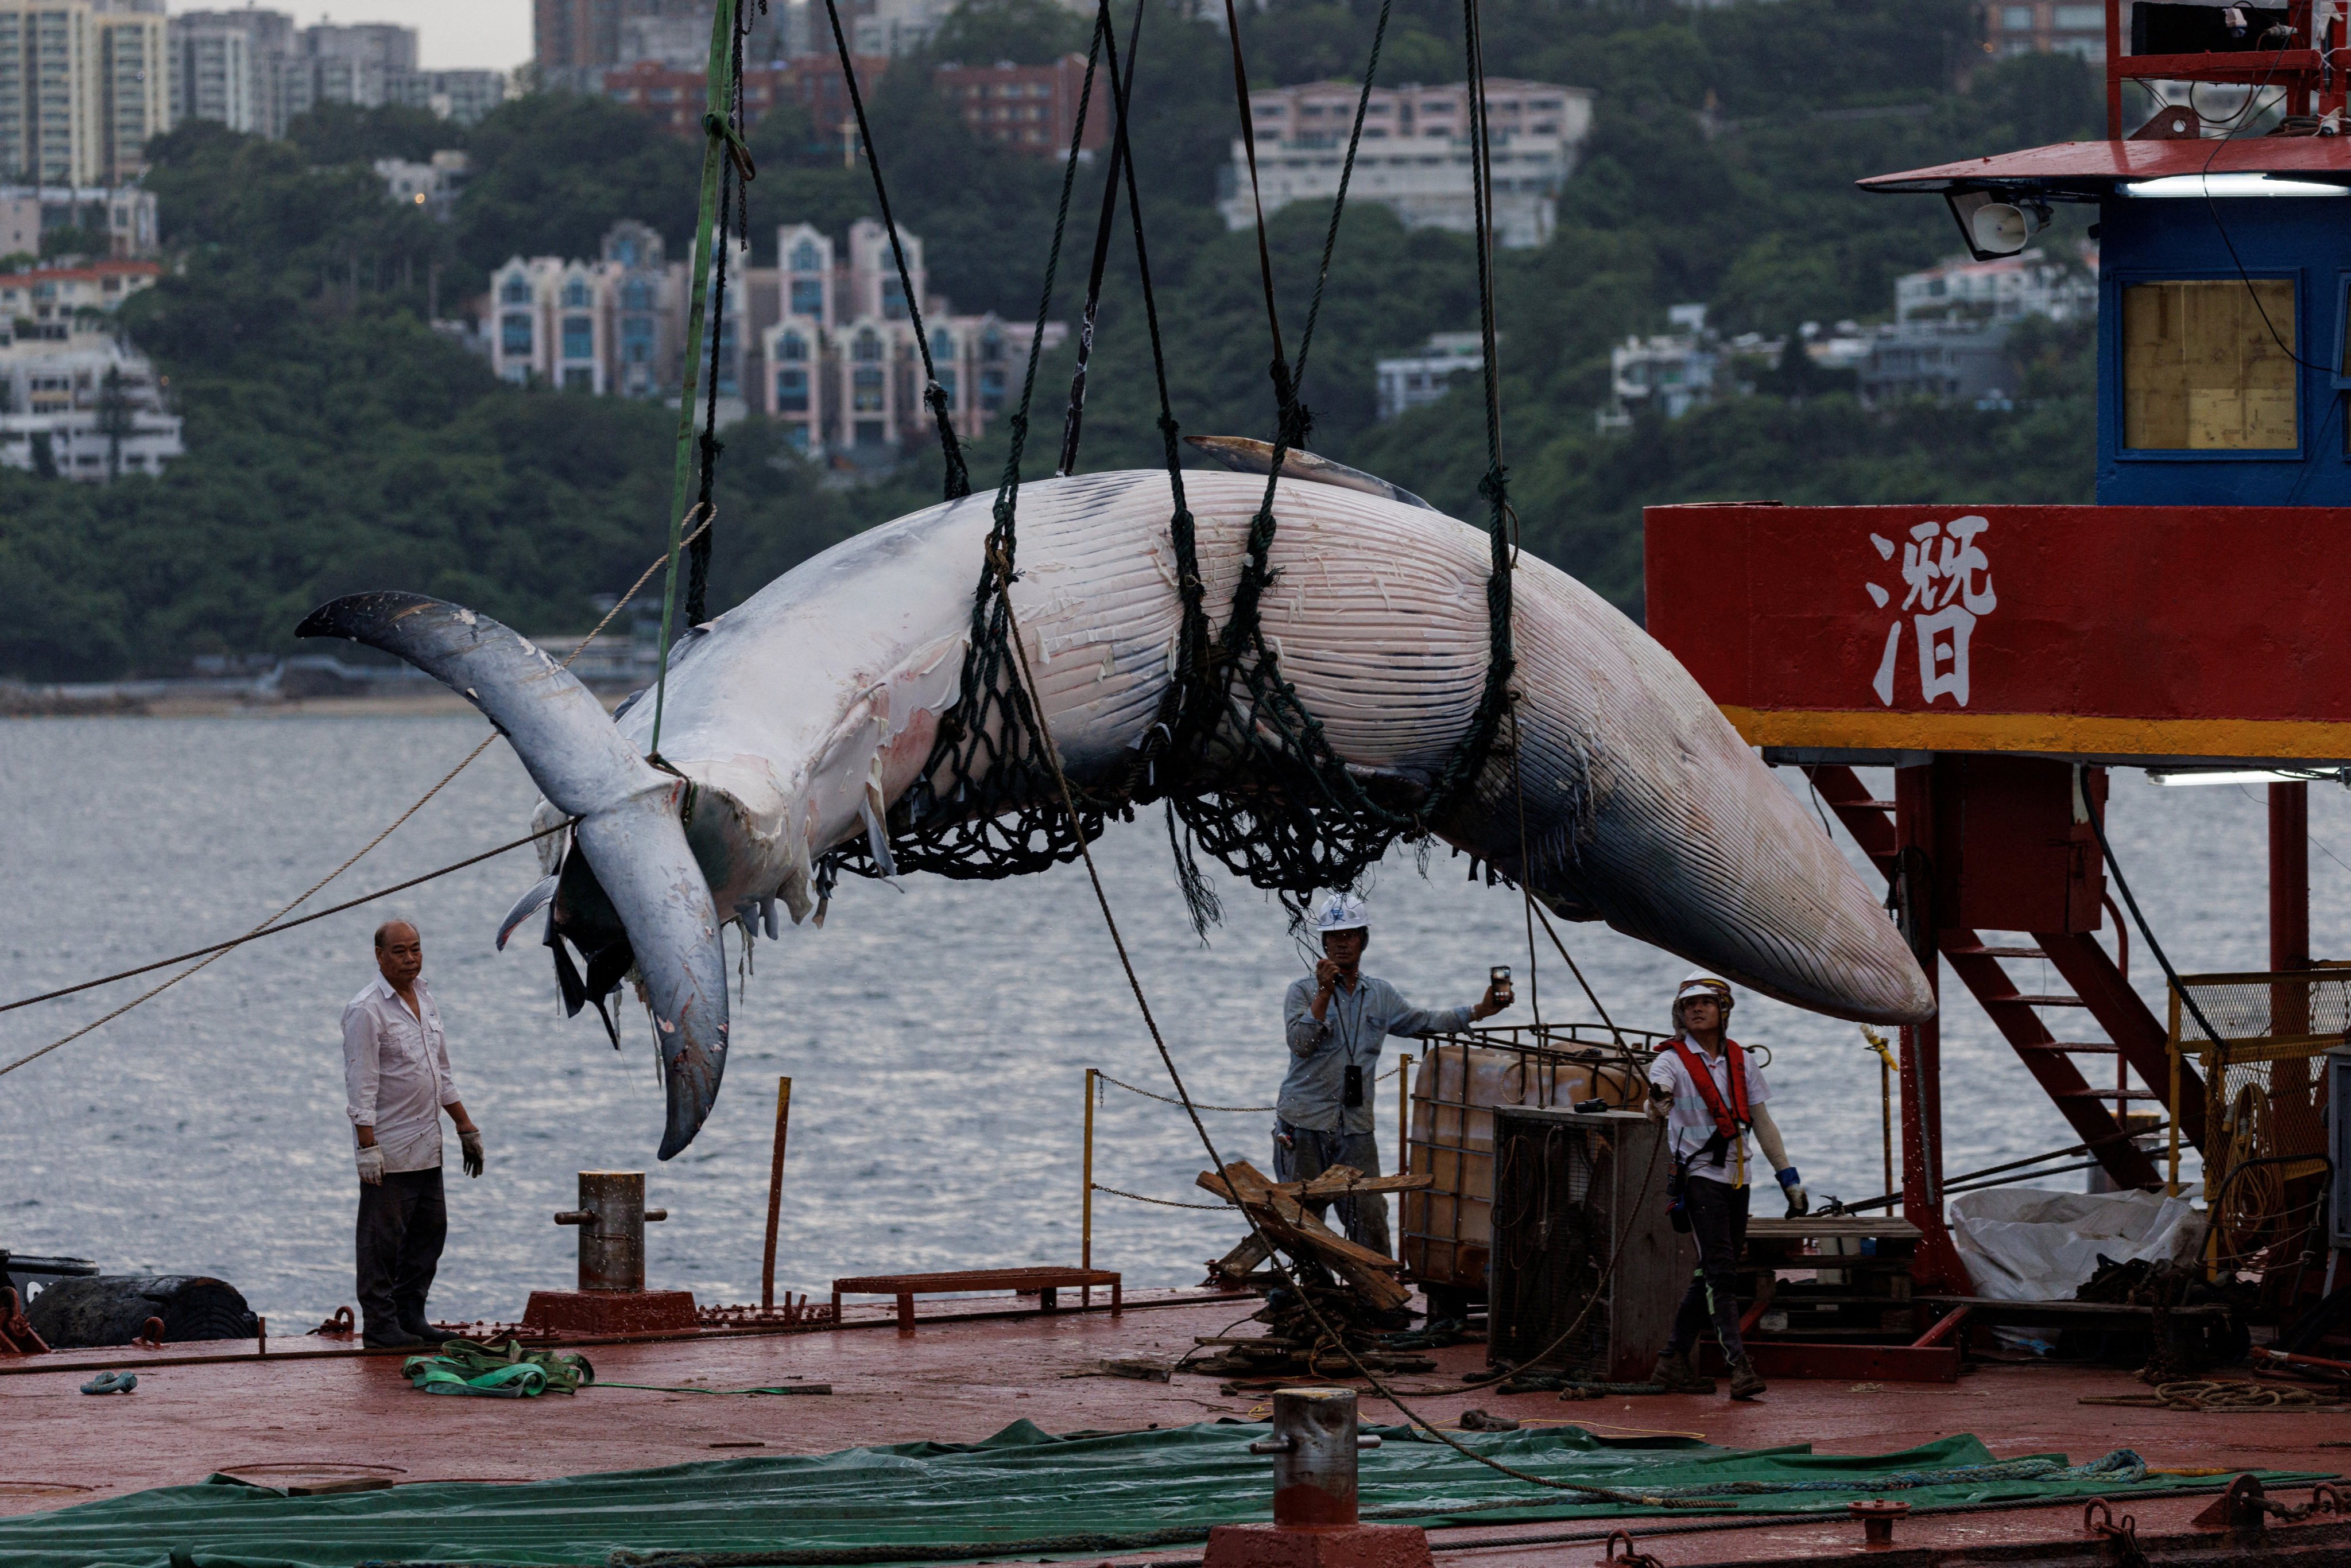 The carcass of the Bryde’s whale is hoisted onto the deck of a vessel in waters near Port Shelter, Hong Kong, on July 31. Photo: Reuters